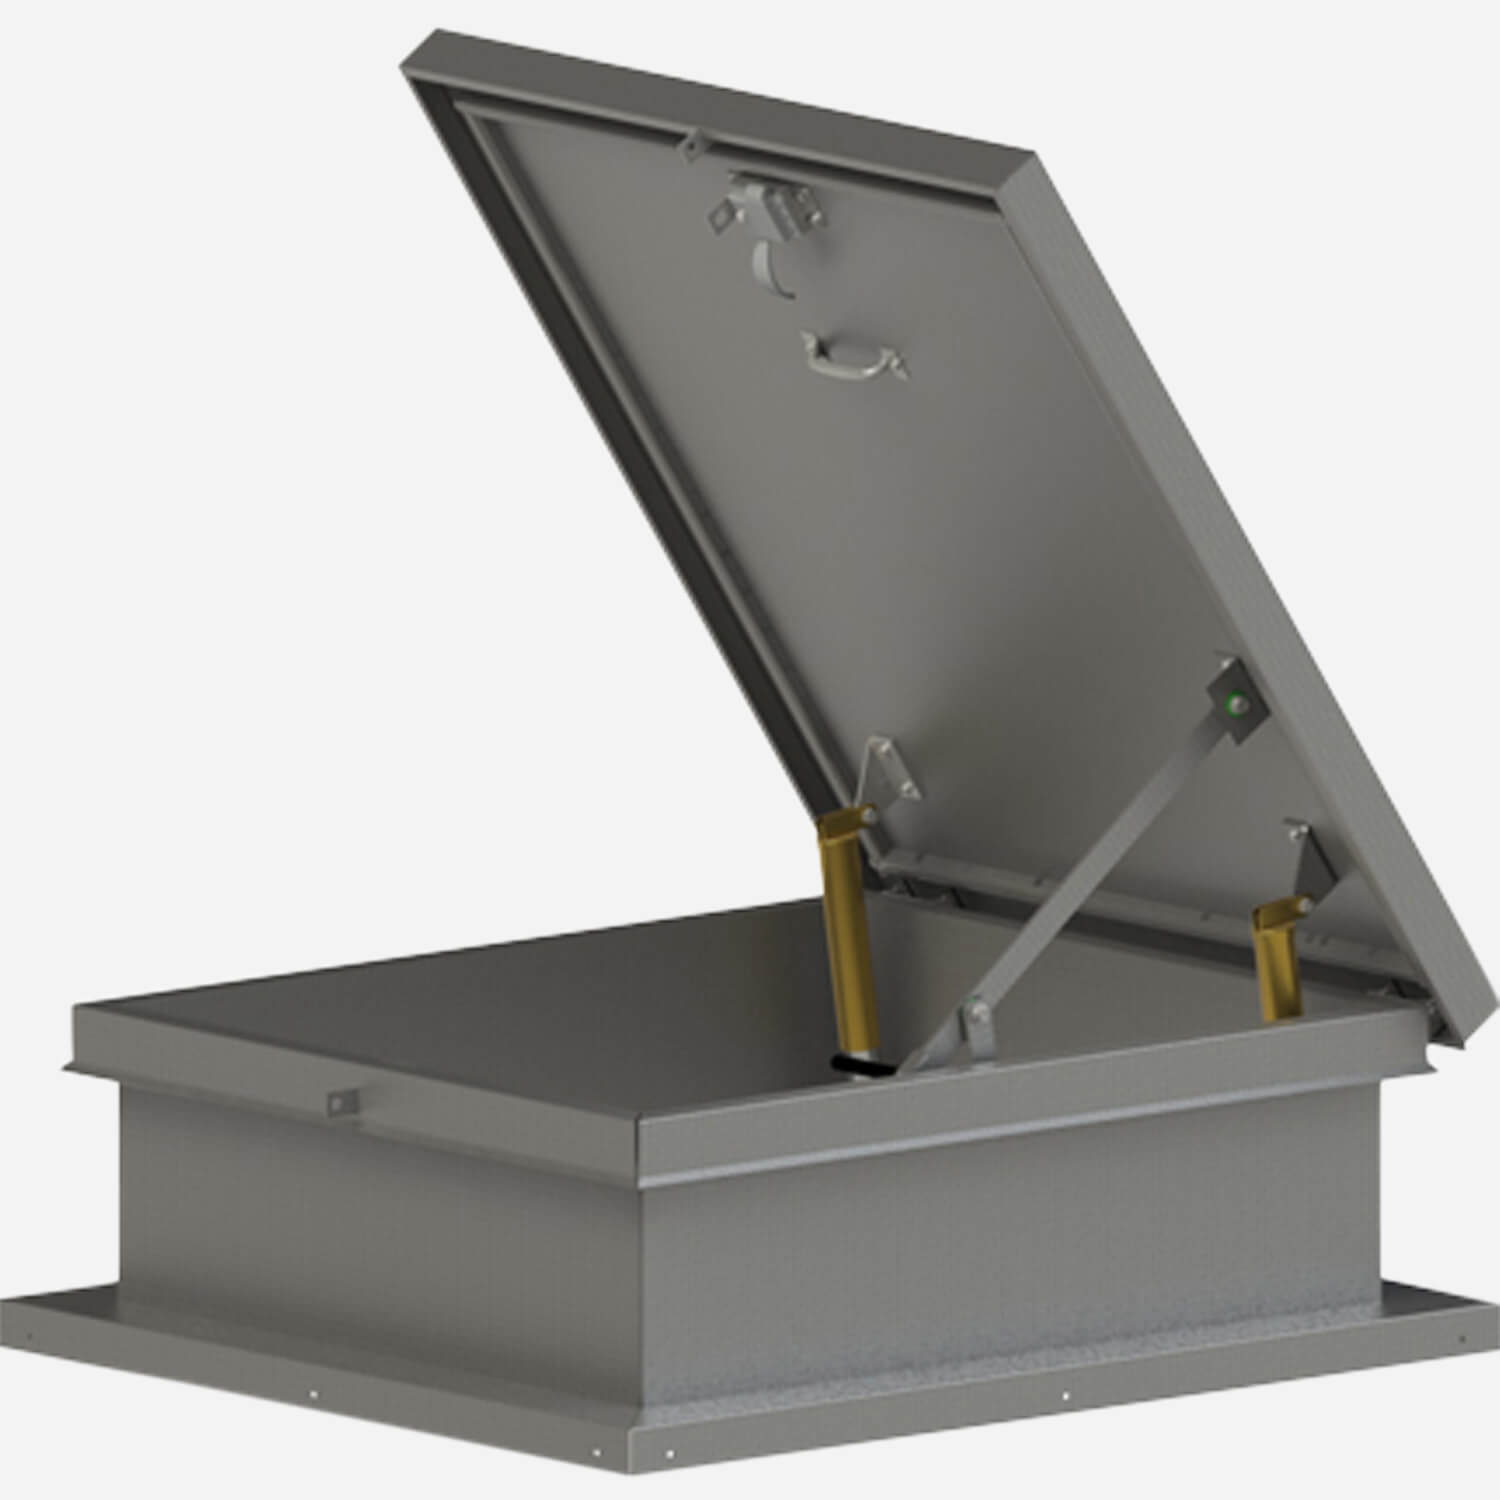 Premium Roof Hatches for Easy Roof Access - Ontario Doors: Your Trusted Source for Quality Roof Hatch Solutions!